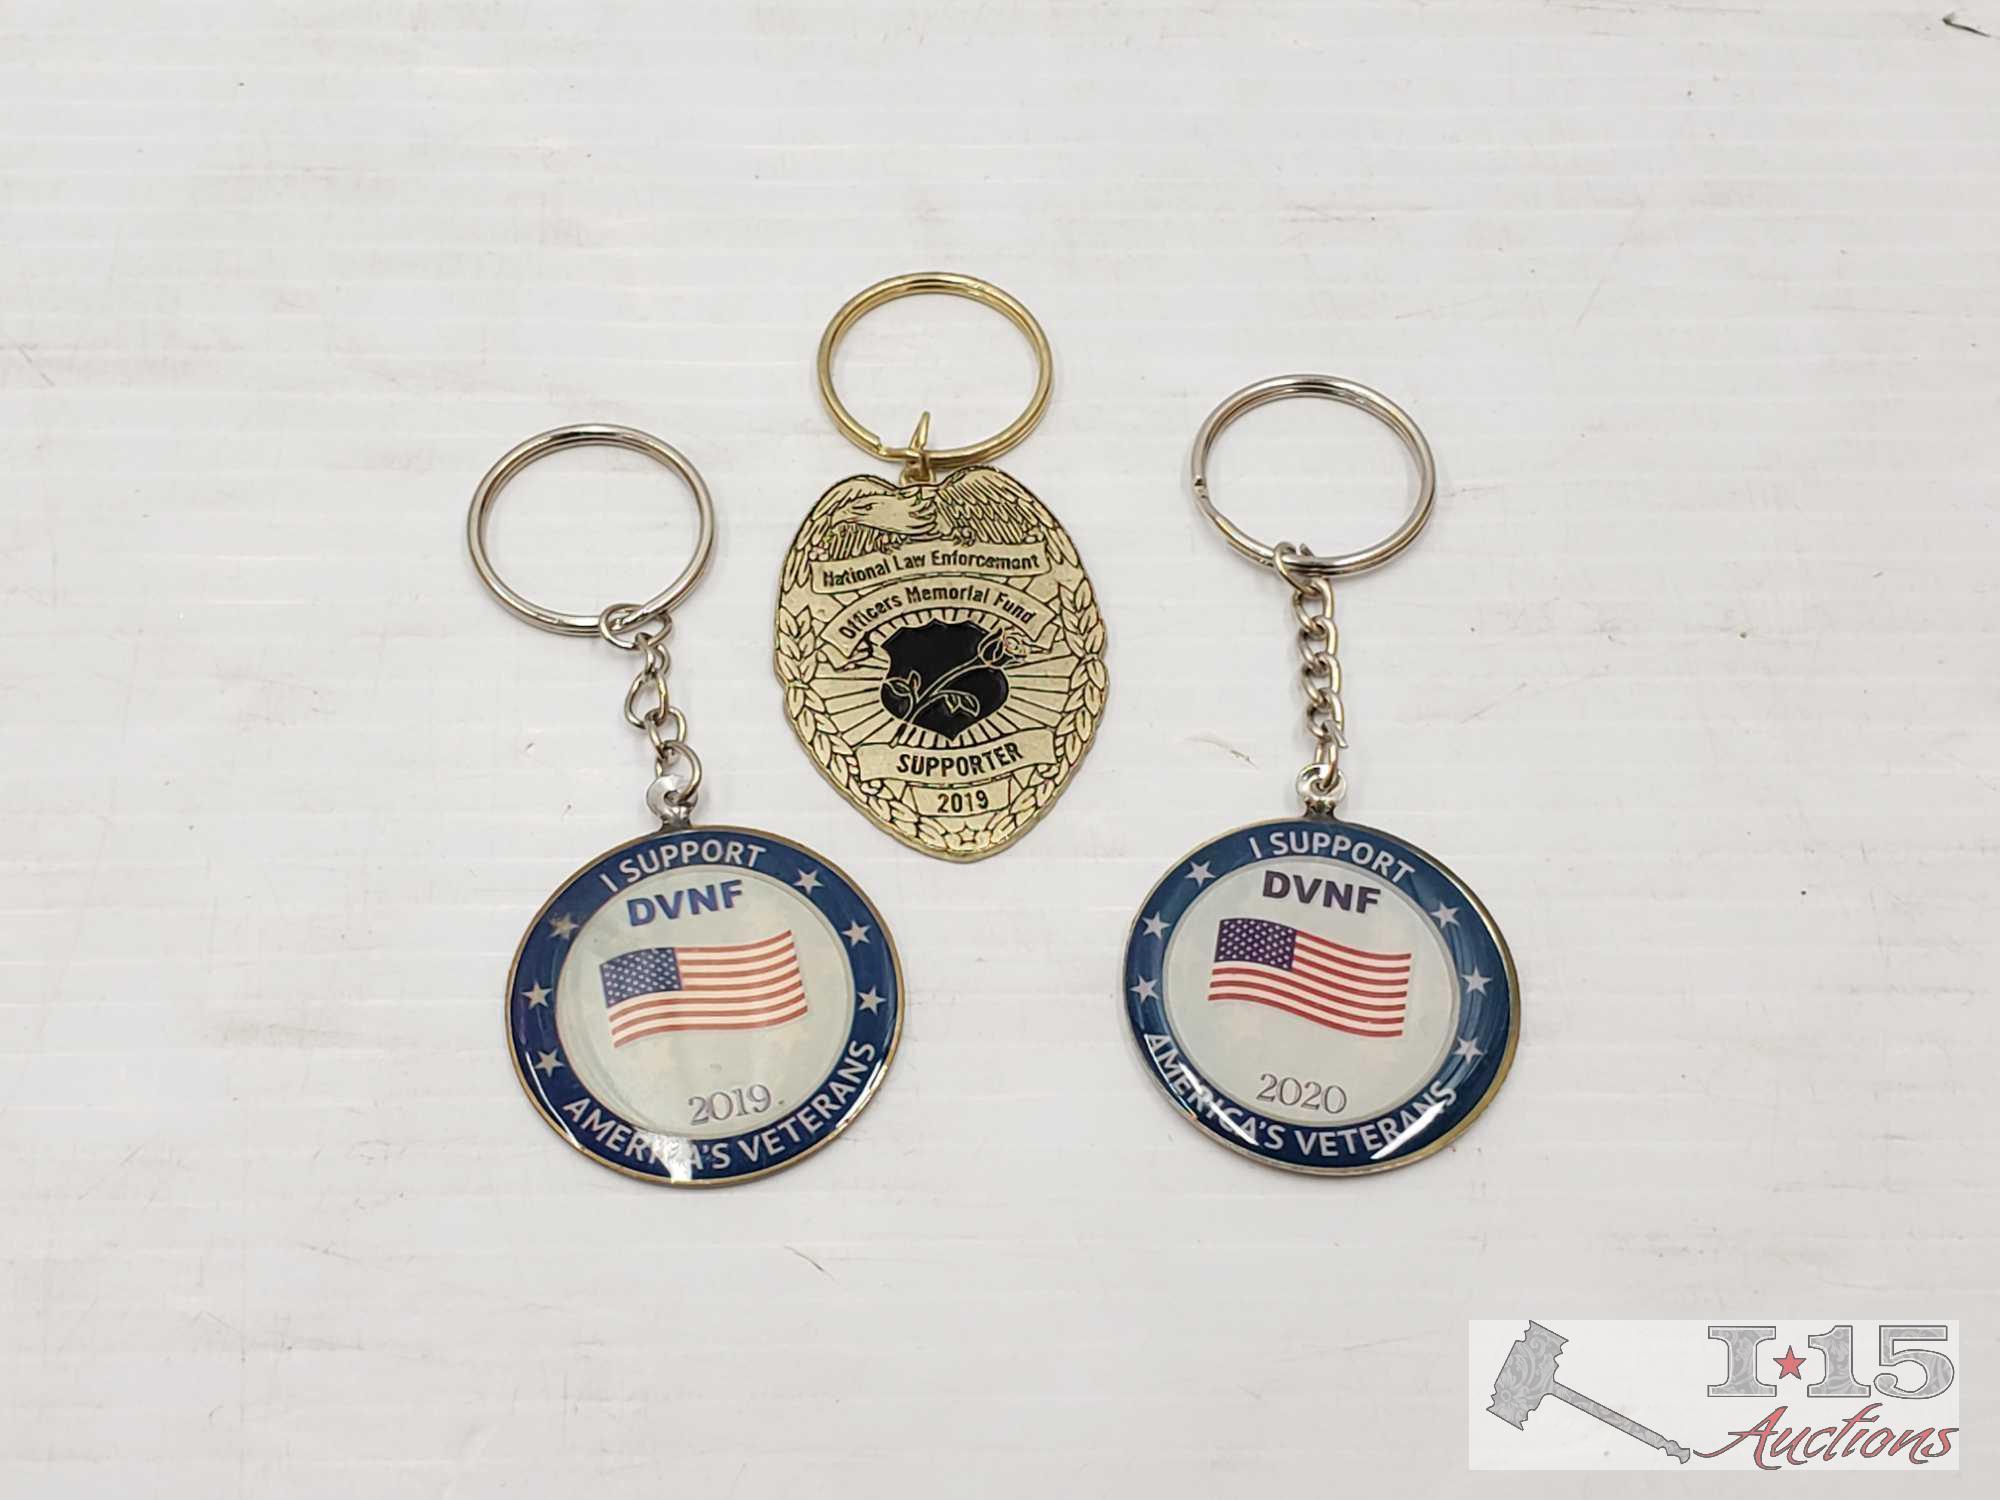 Handgun Replica, Wounded Warrior Patches, Veteran Keychains, And More!